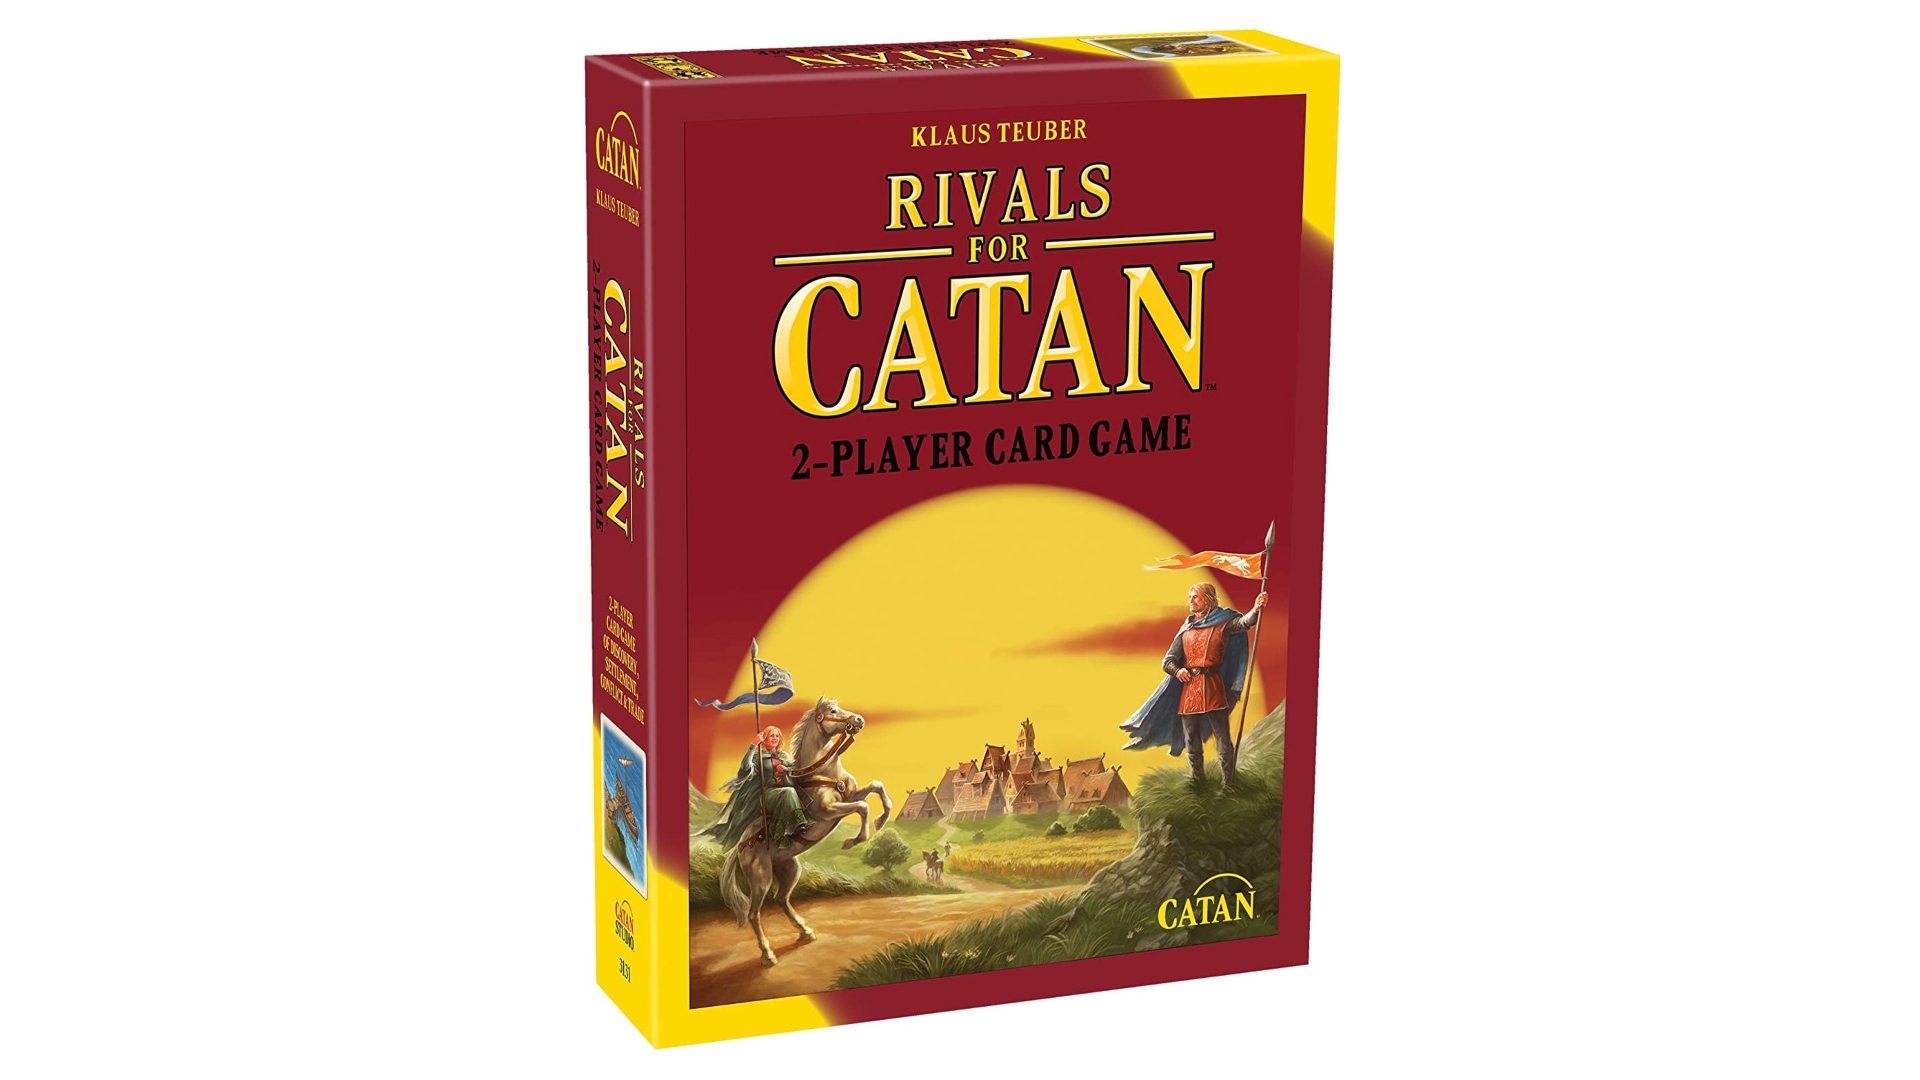 Two player card game, Rivals for Catan, boxed on a white background.